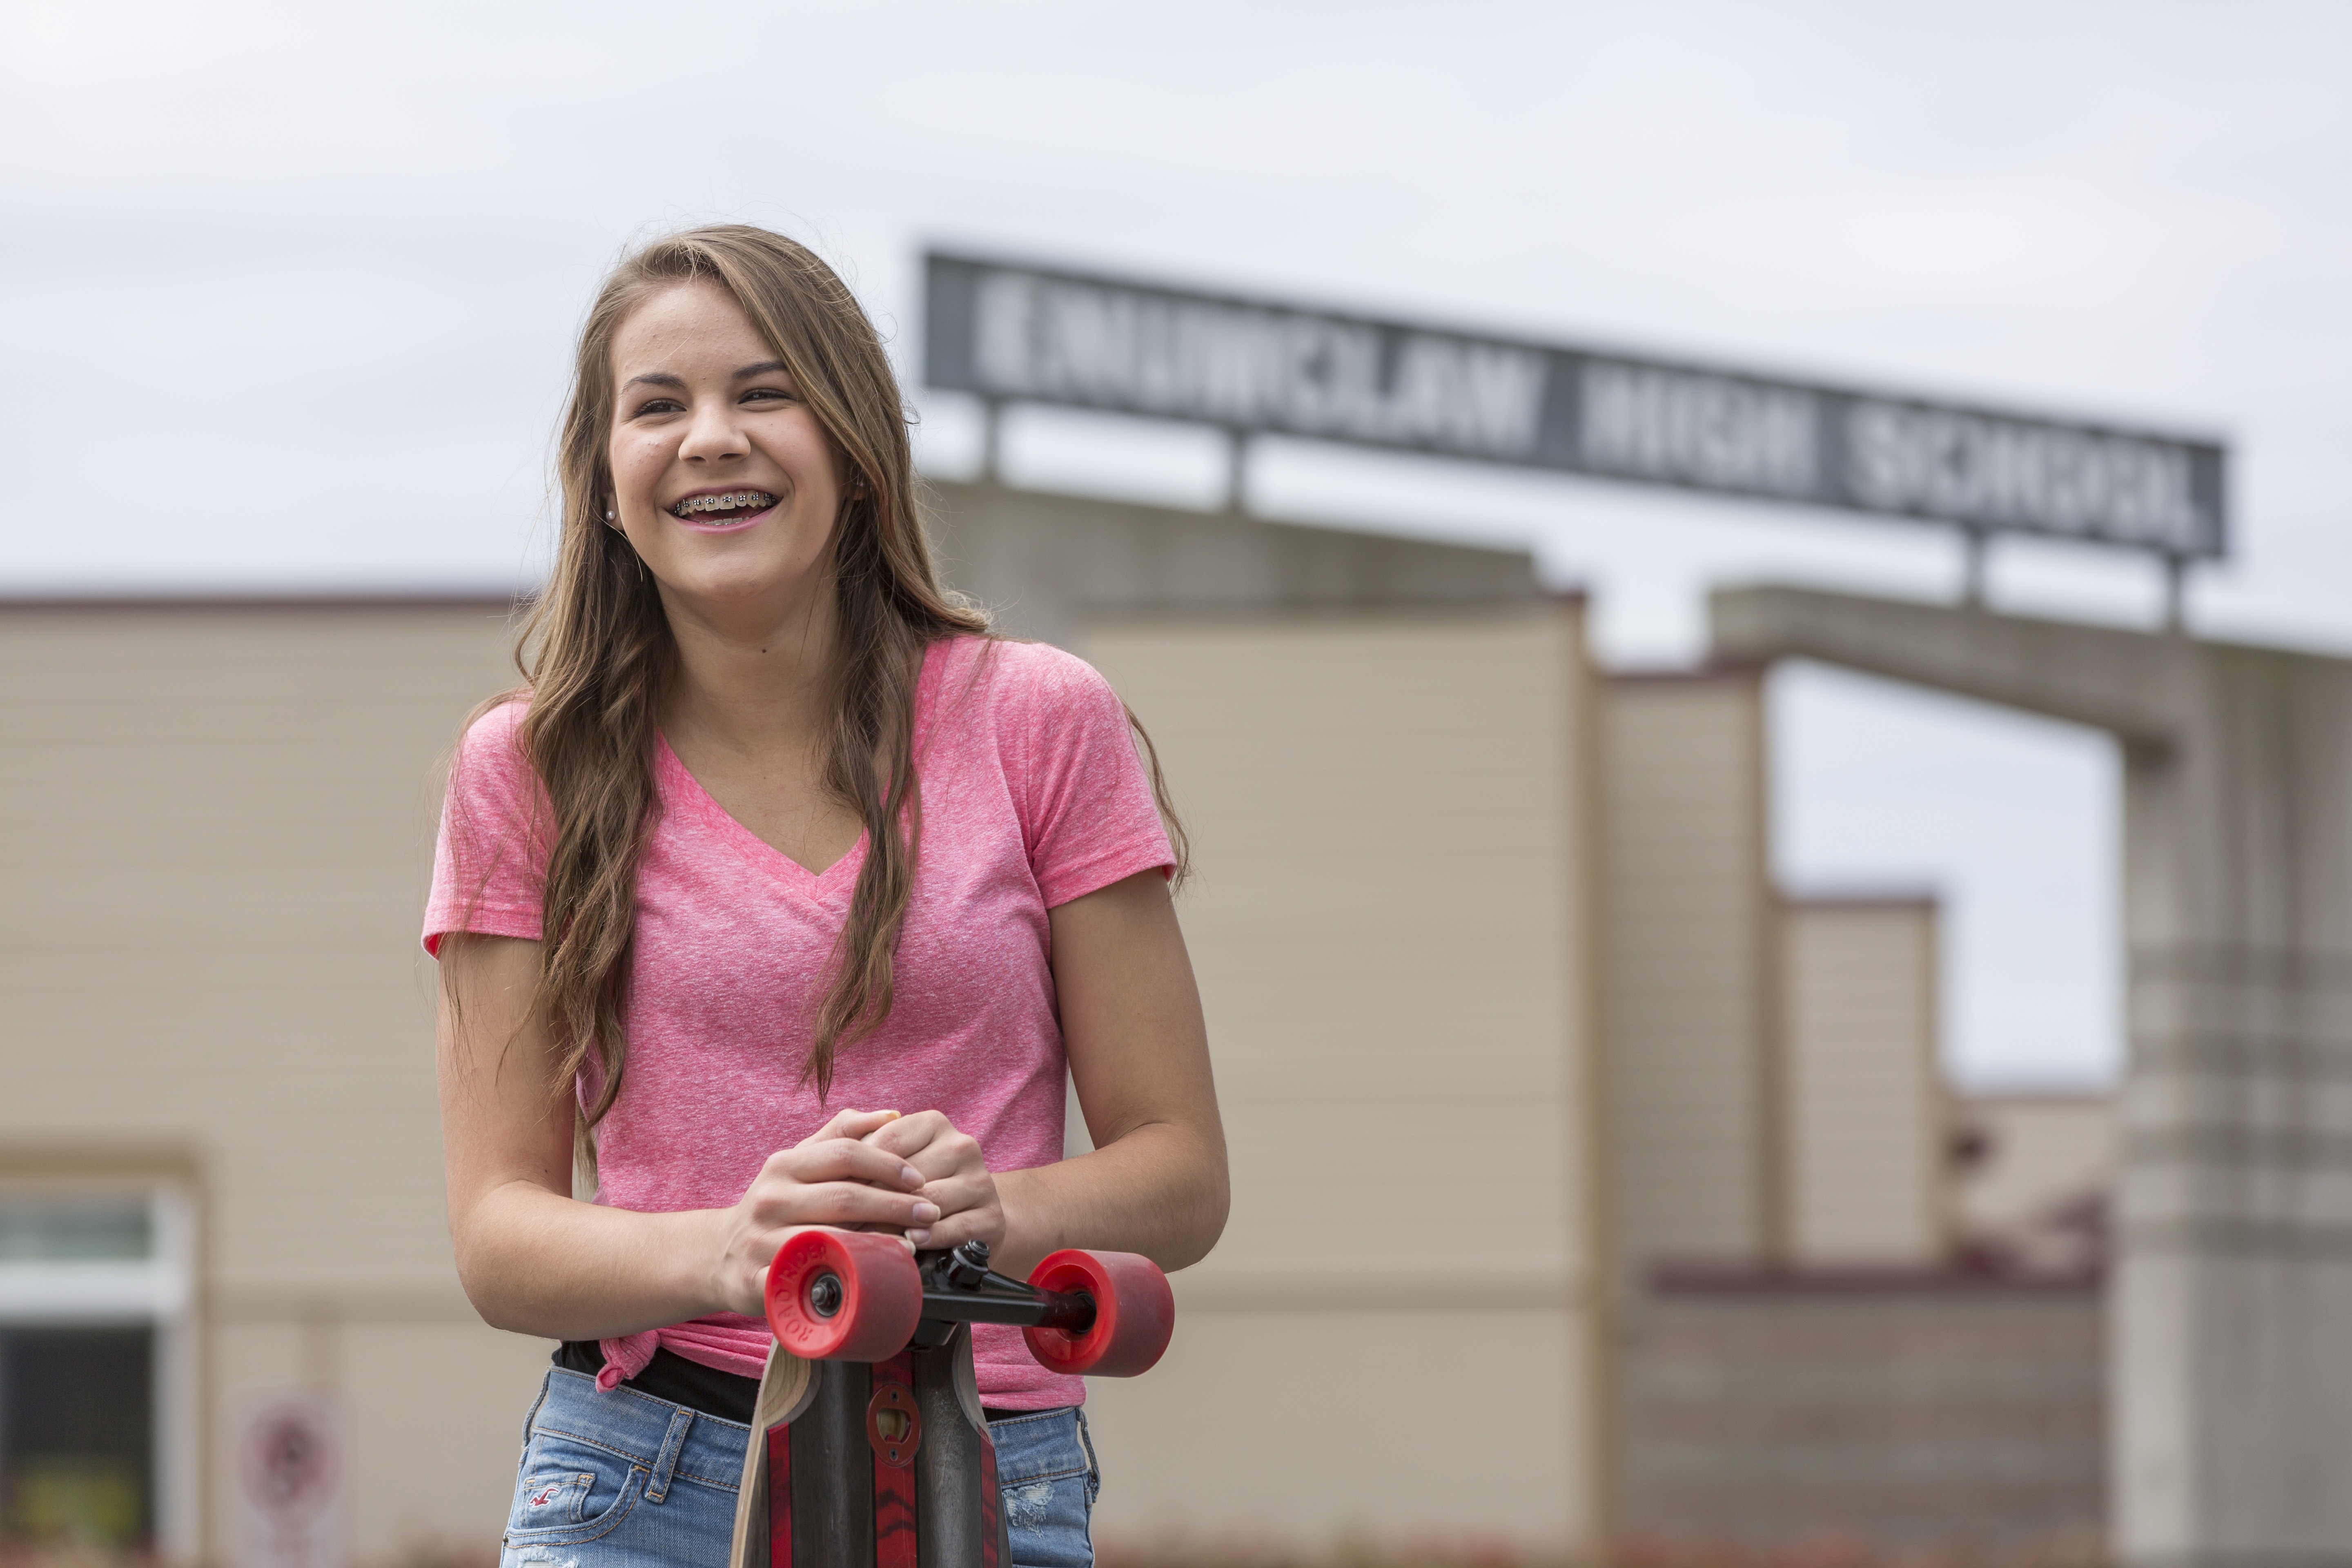 teenage girl smiling and holding a skateboard